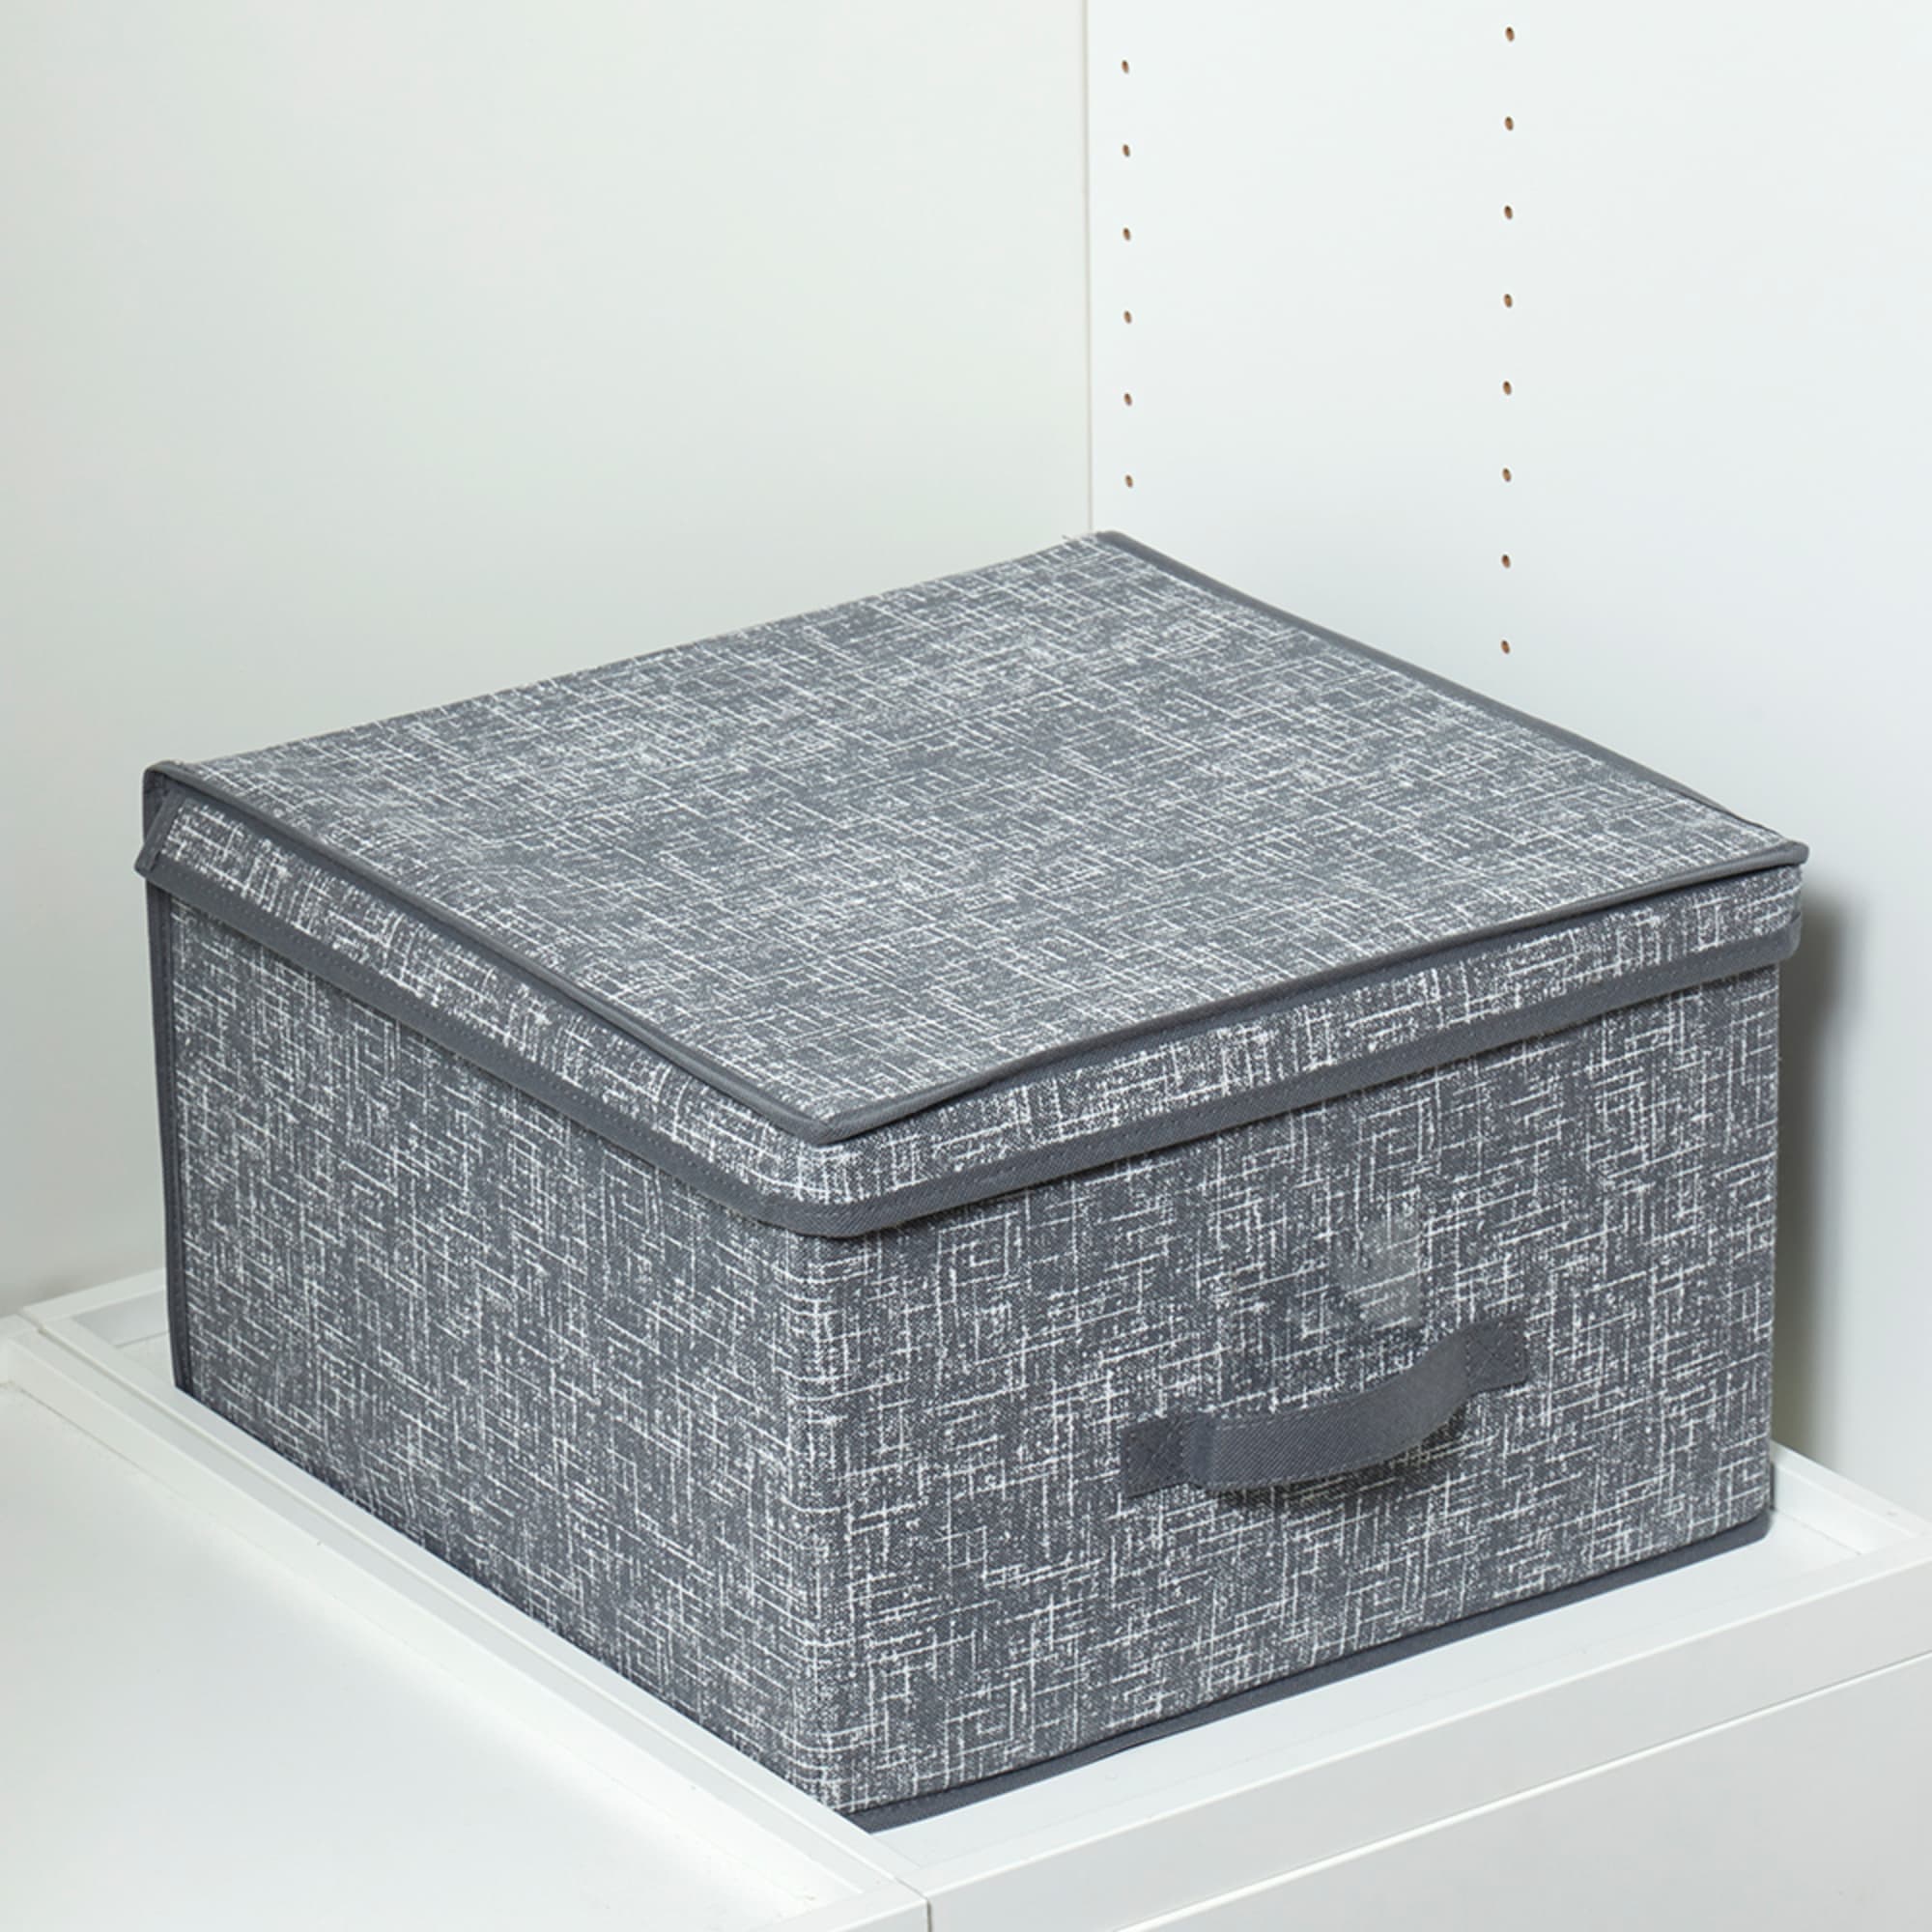 Home Basics Graph Line Jumbo Non-Woven Storage Box with Label Window
 $6.00 EACH, CASE PACK OF 12